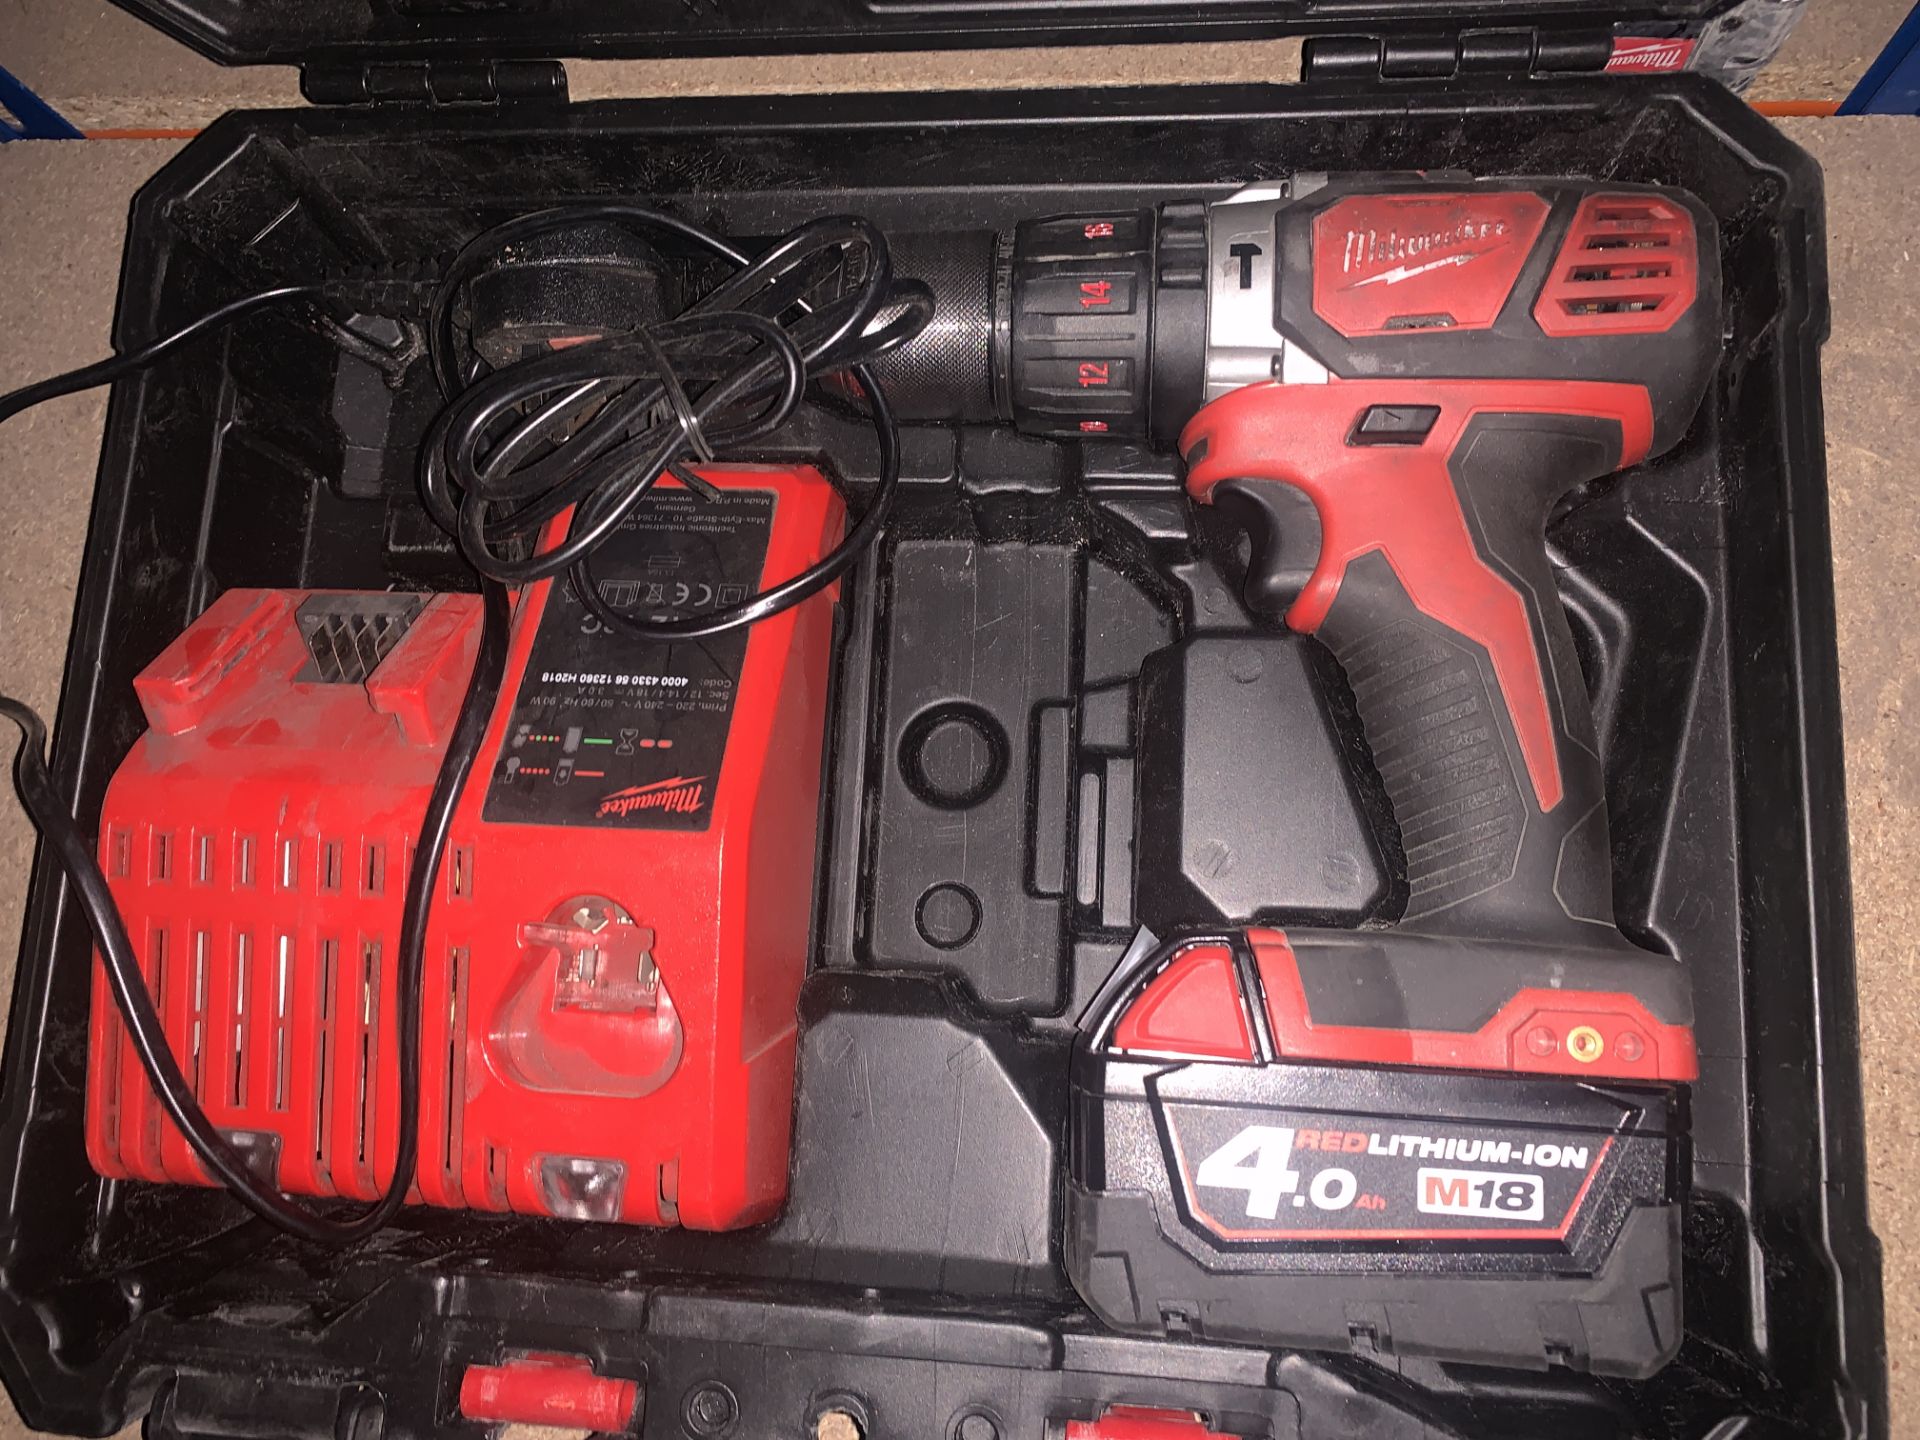 MILWAUKEE M18 BPDN-402C 18V 4.0AH LI-ION REDLITHIUM CORDLESS COMBI DRILL COMES WITH CARRY CASE